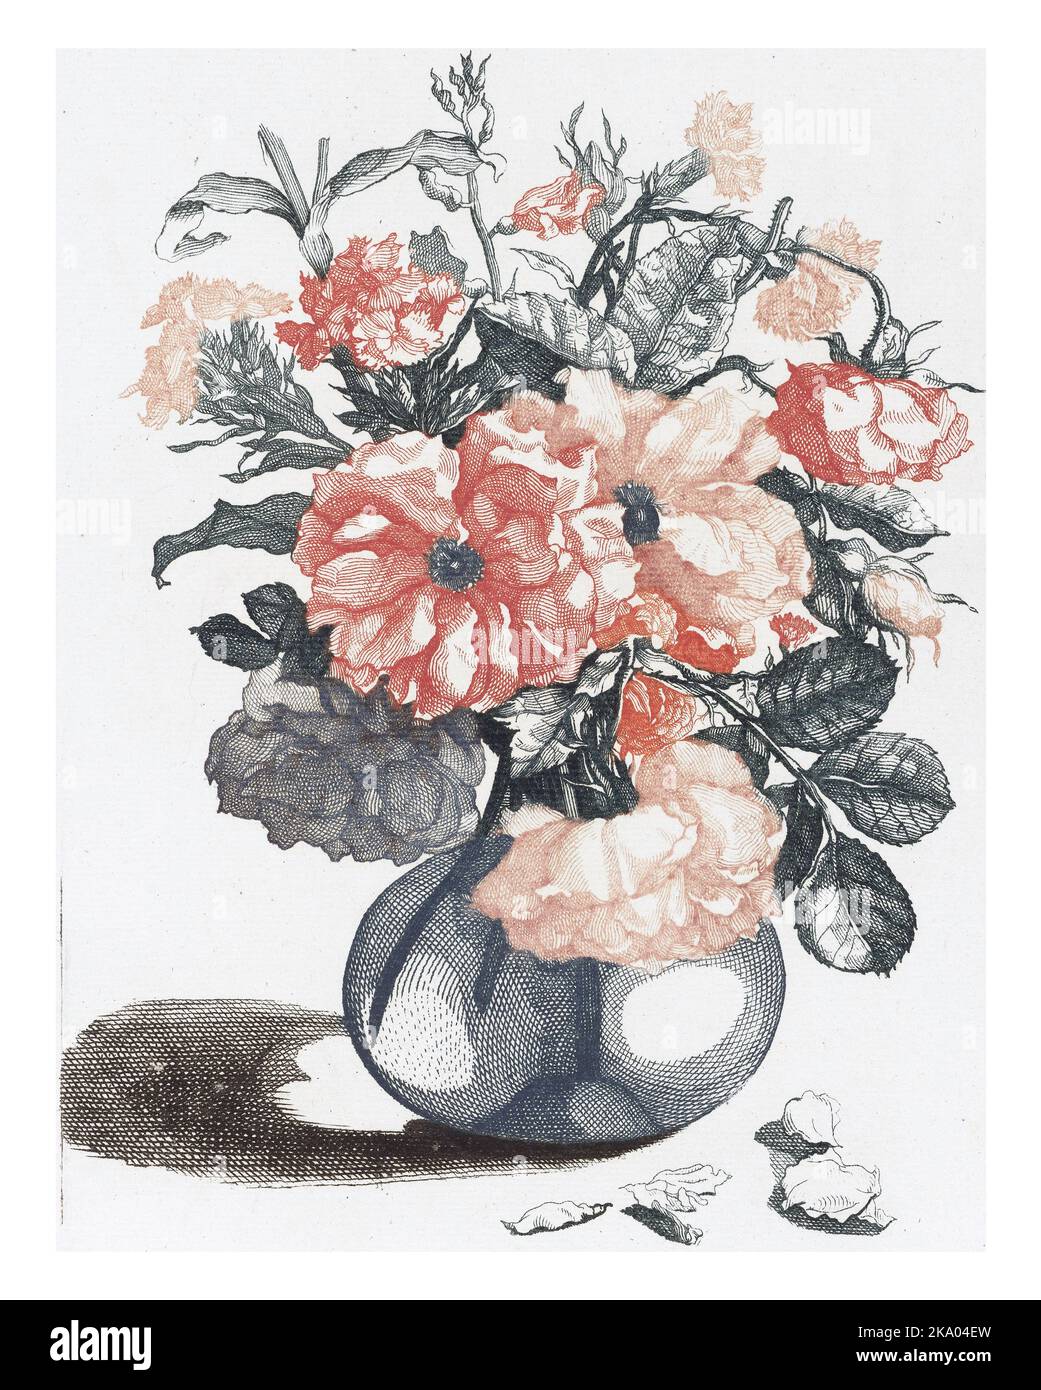 Five Prints of Flowers in Glass Vases, anonymous, after Jean Baptiste Monnoyer, 1688 - 1698 Glass vase with flowers. Next to the vase some petals. Stock Photo